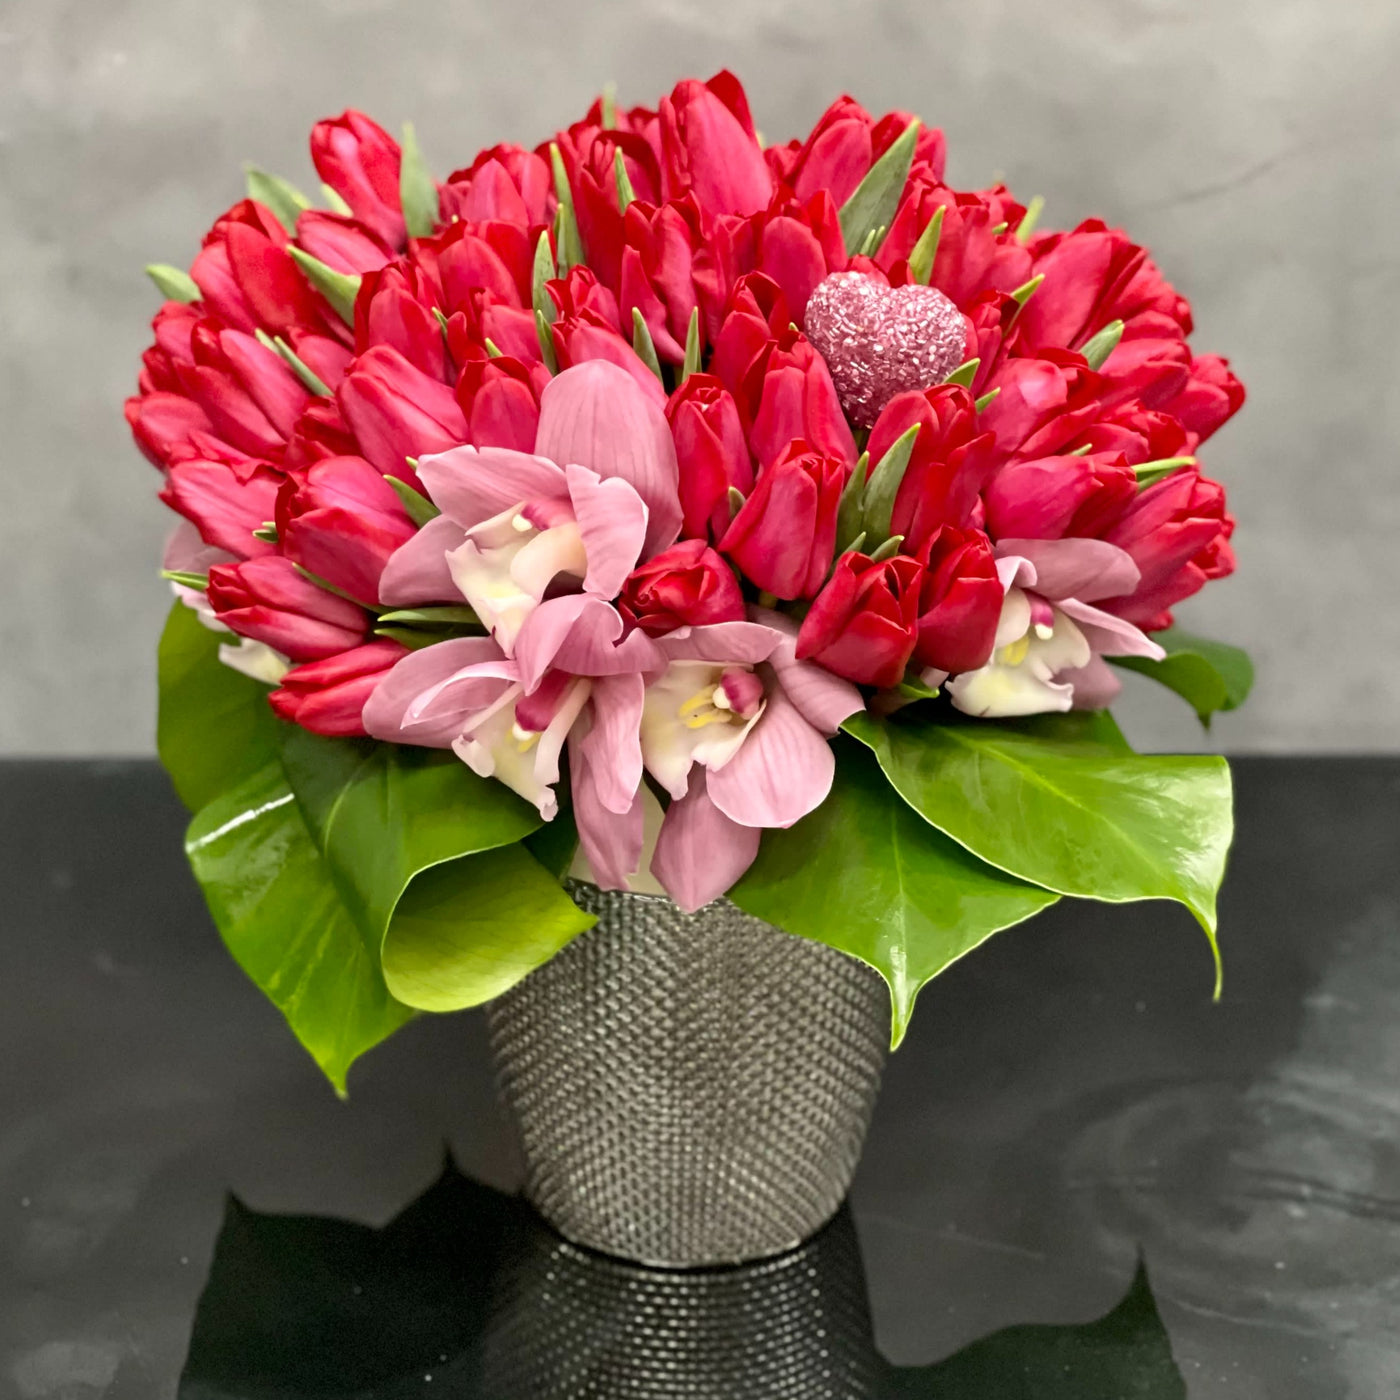 50 Beautiful dress-up pink Tulips from Beverly Hills Florist that stand tall and are available for same day delivery! Placed in beautiful modern silver vase. Orchids and greens at its base add to the beauty and delight of this sweet design. A chic and contemporary look that's a great choice for many occasions. This arrangement becomes approximately  10" W x 16" H. Birthday flowers, thank you flowers, get well flowers, congratulations flowers